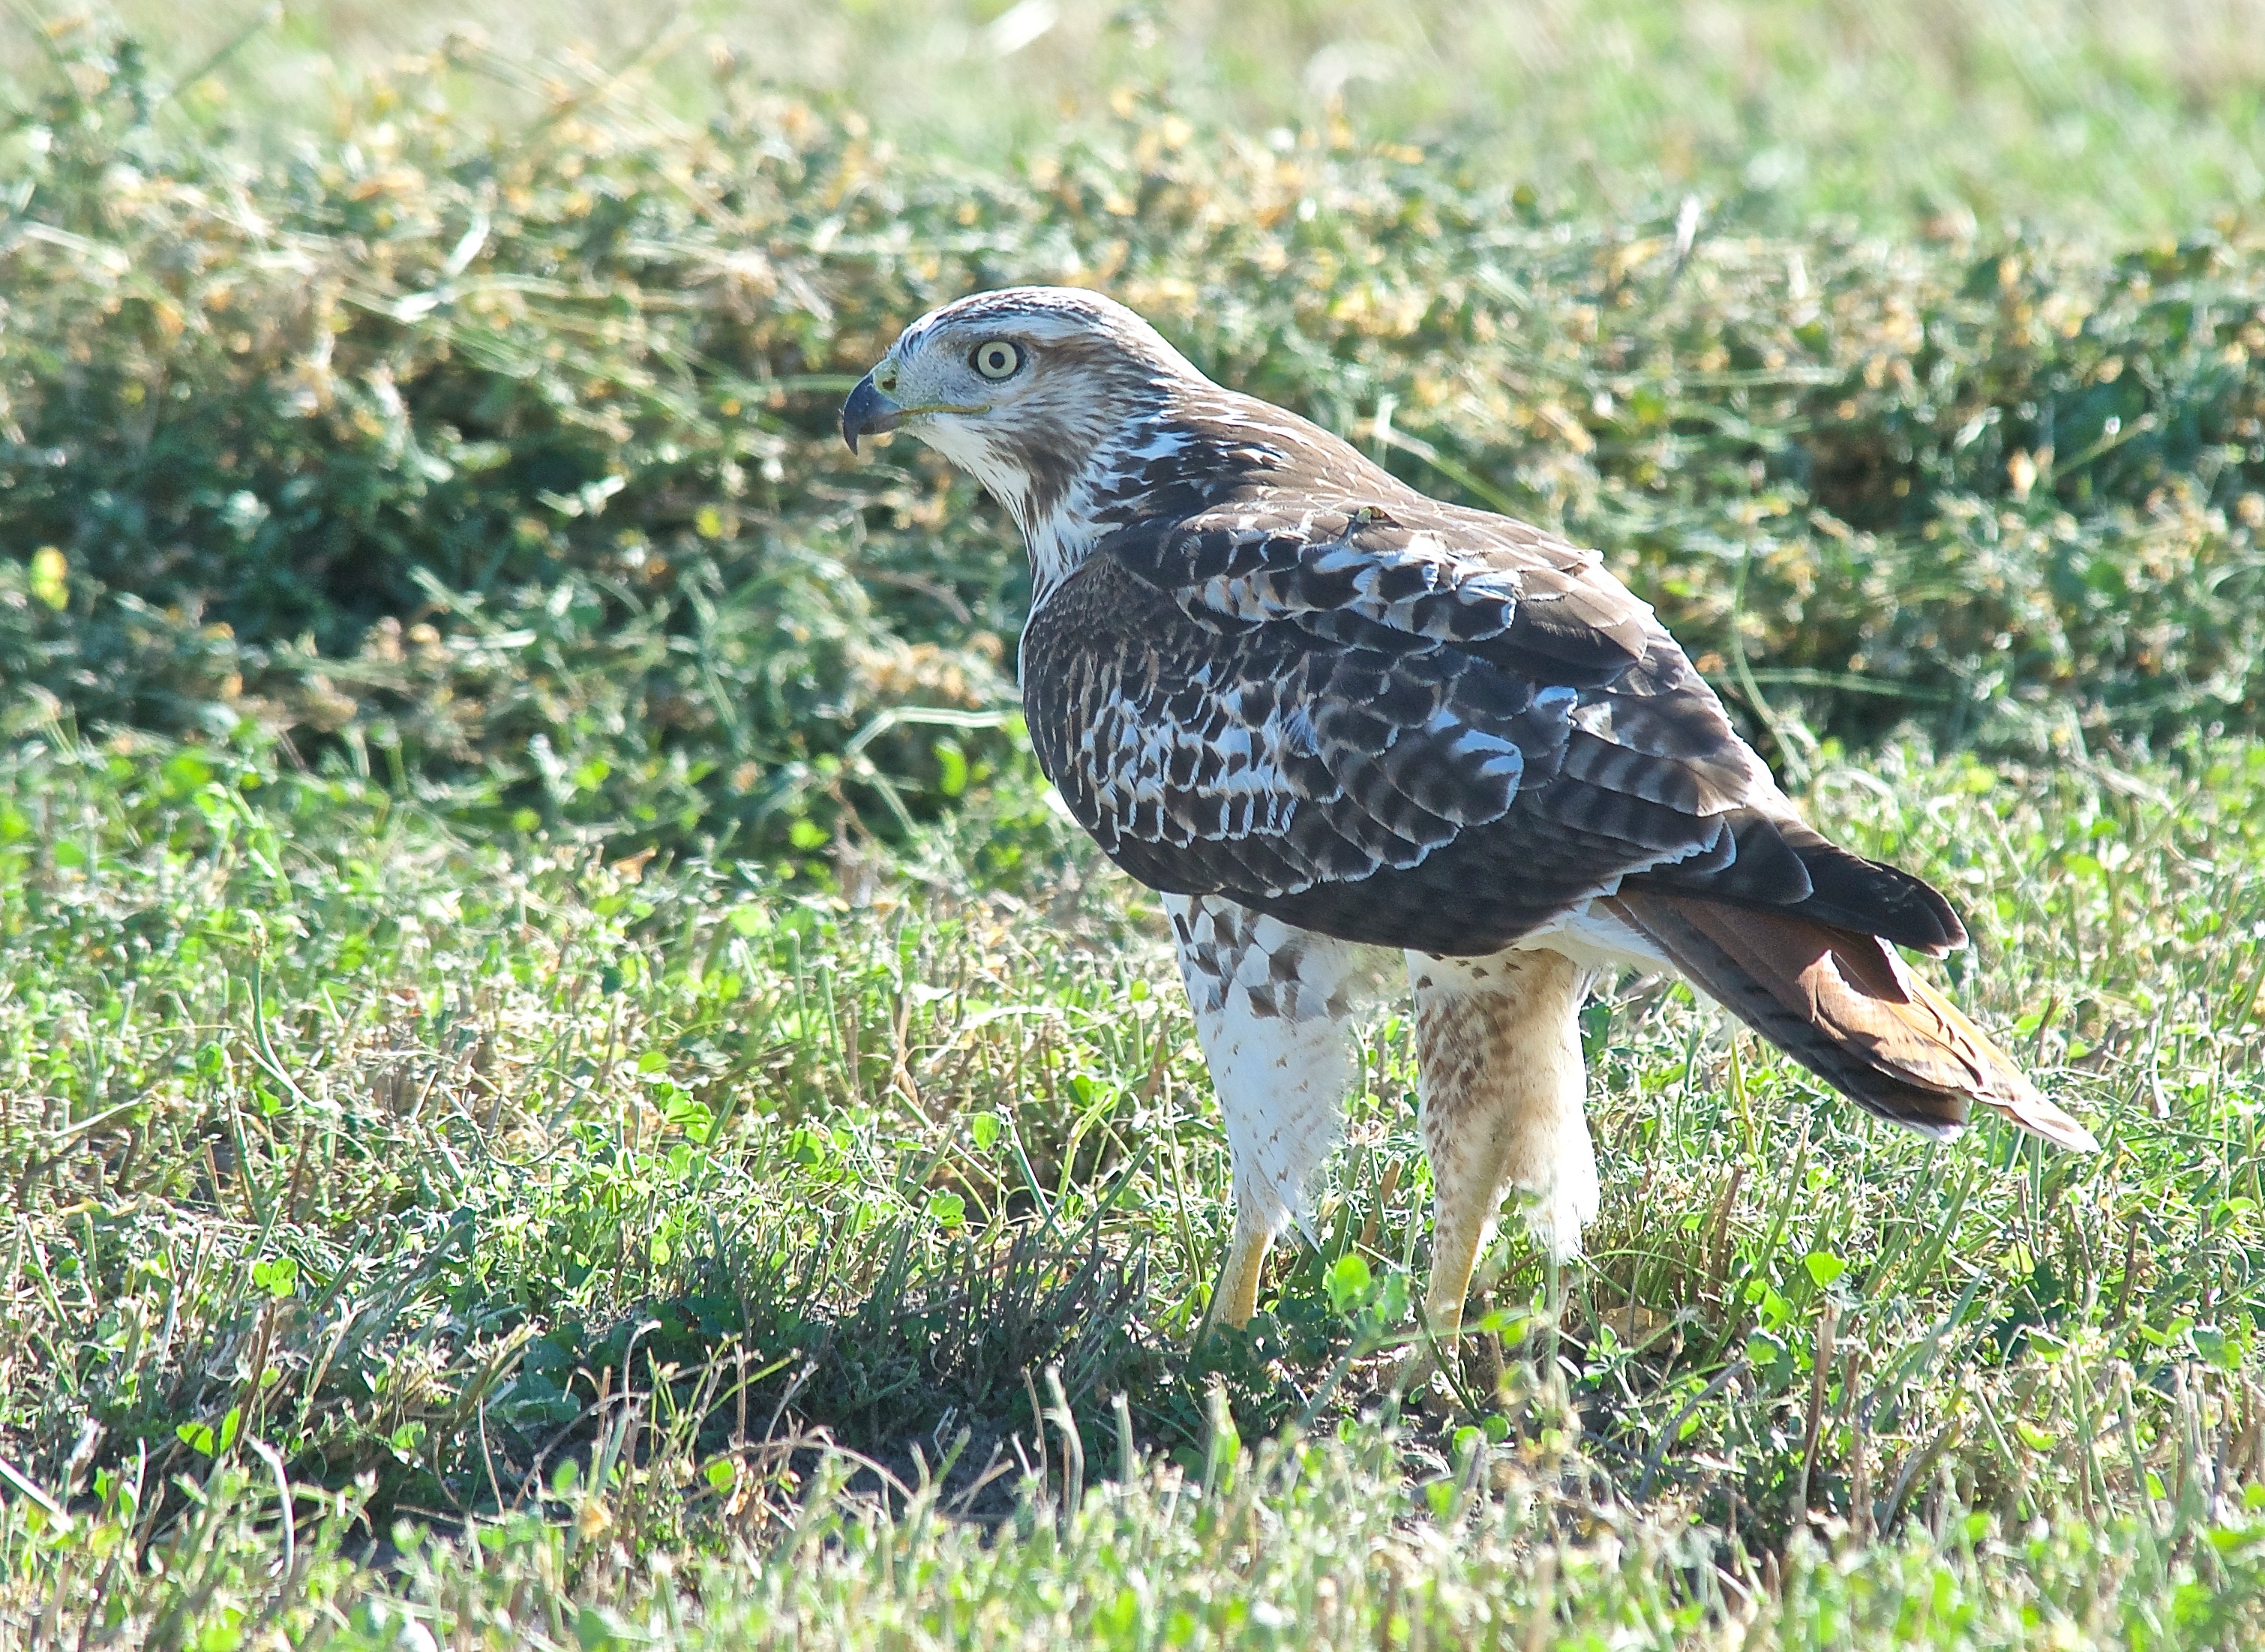 Red-Tailed Hawk with Mouse